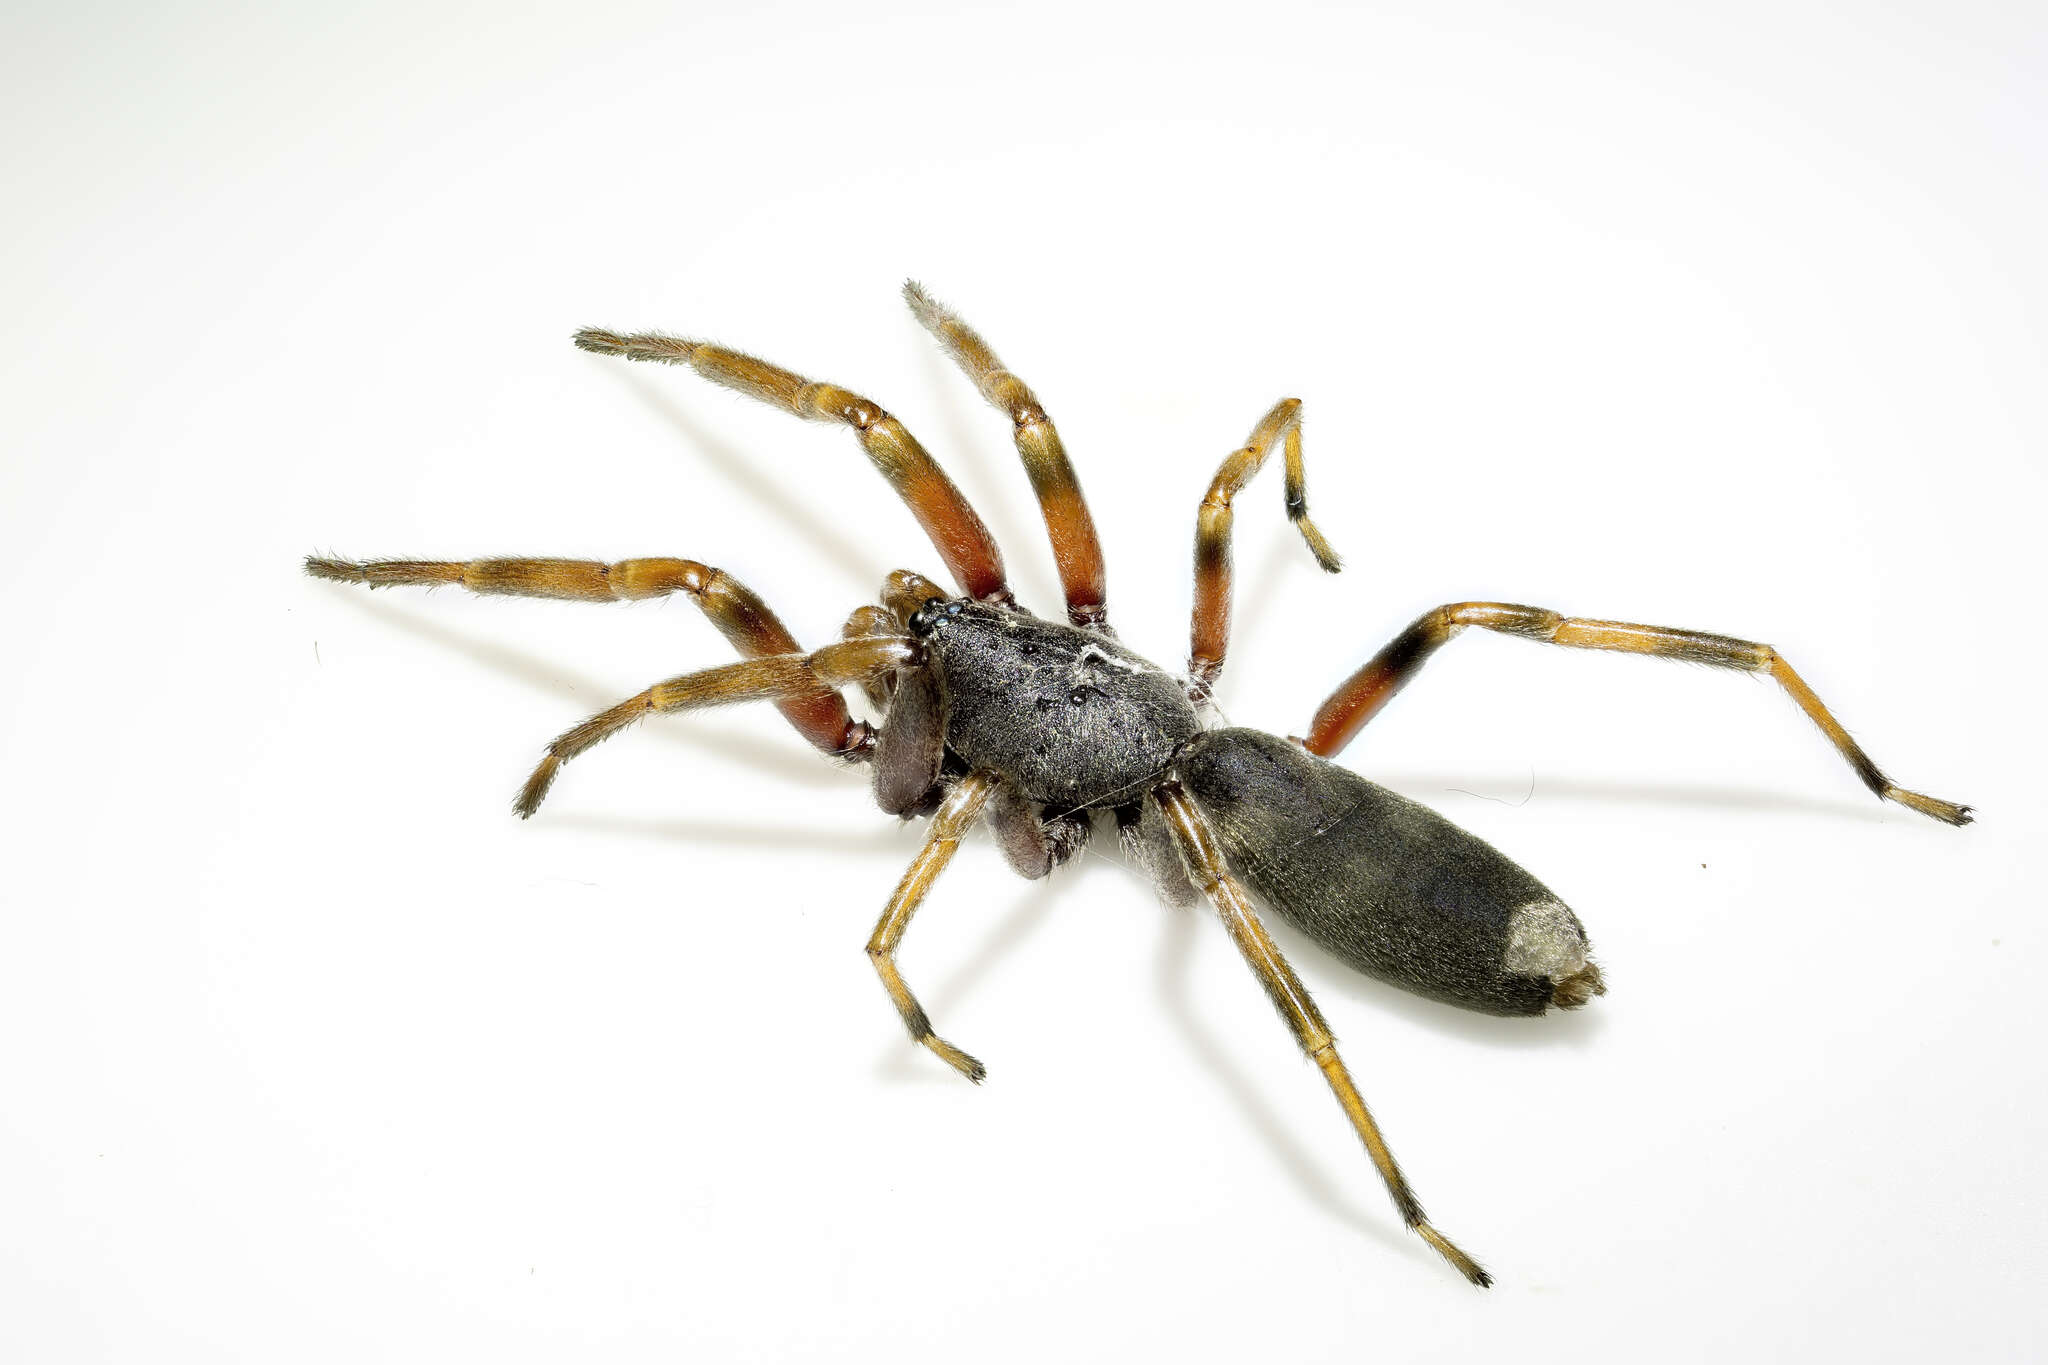 Image of White-tailed spider